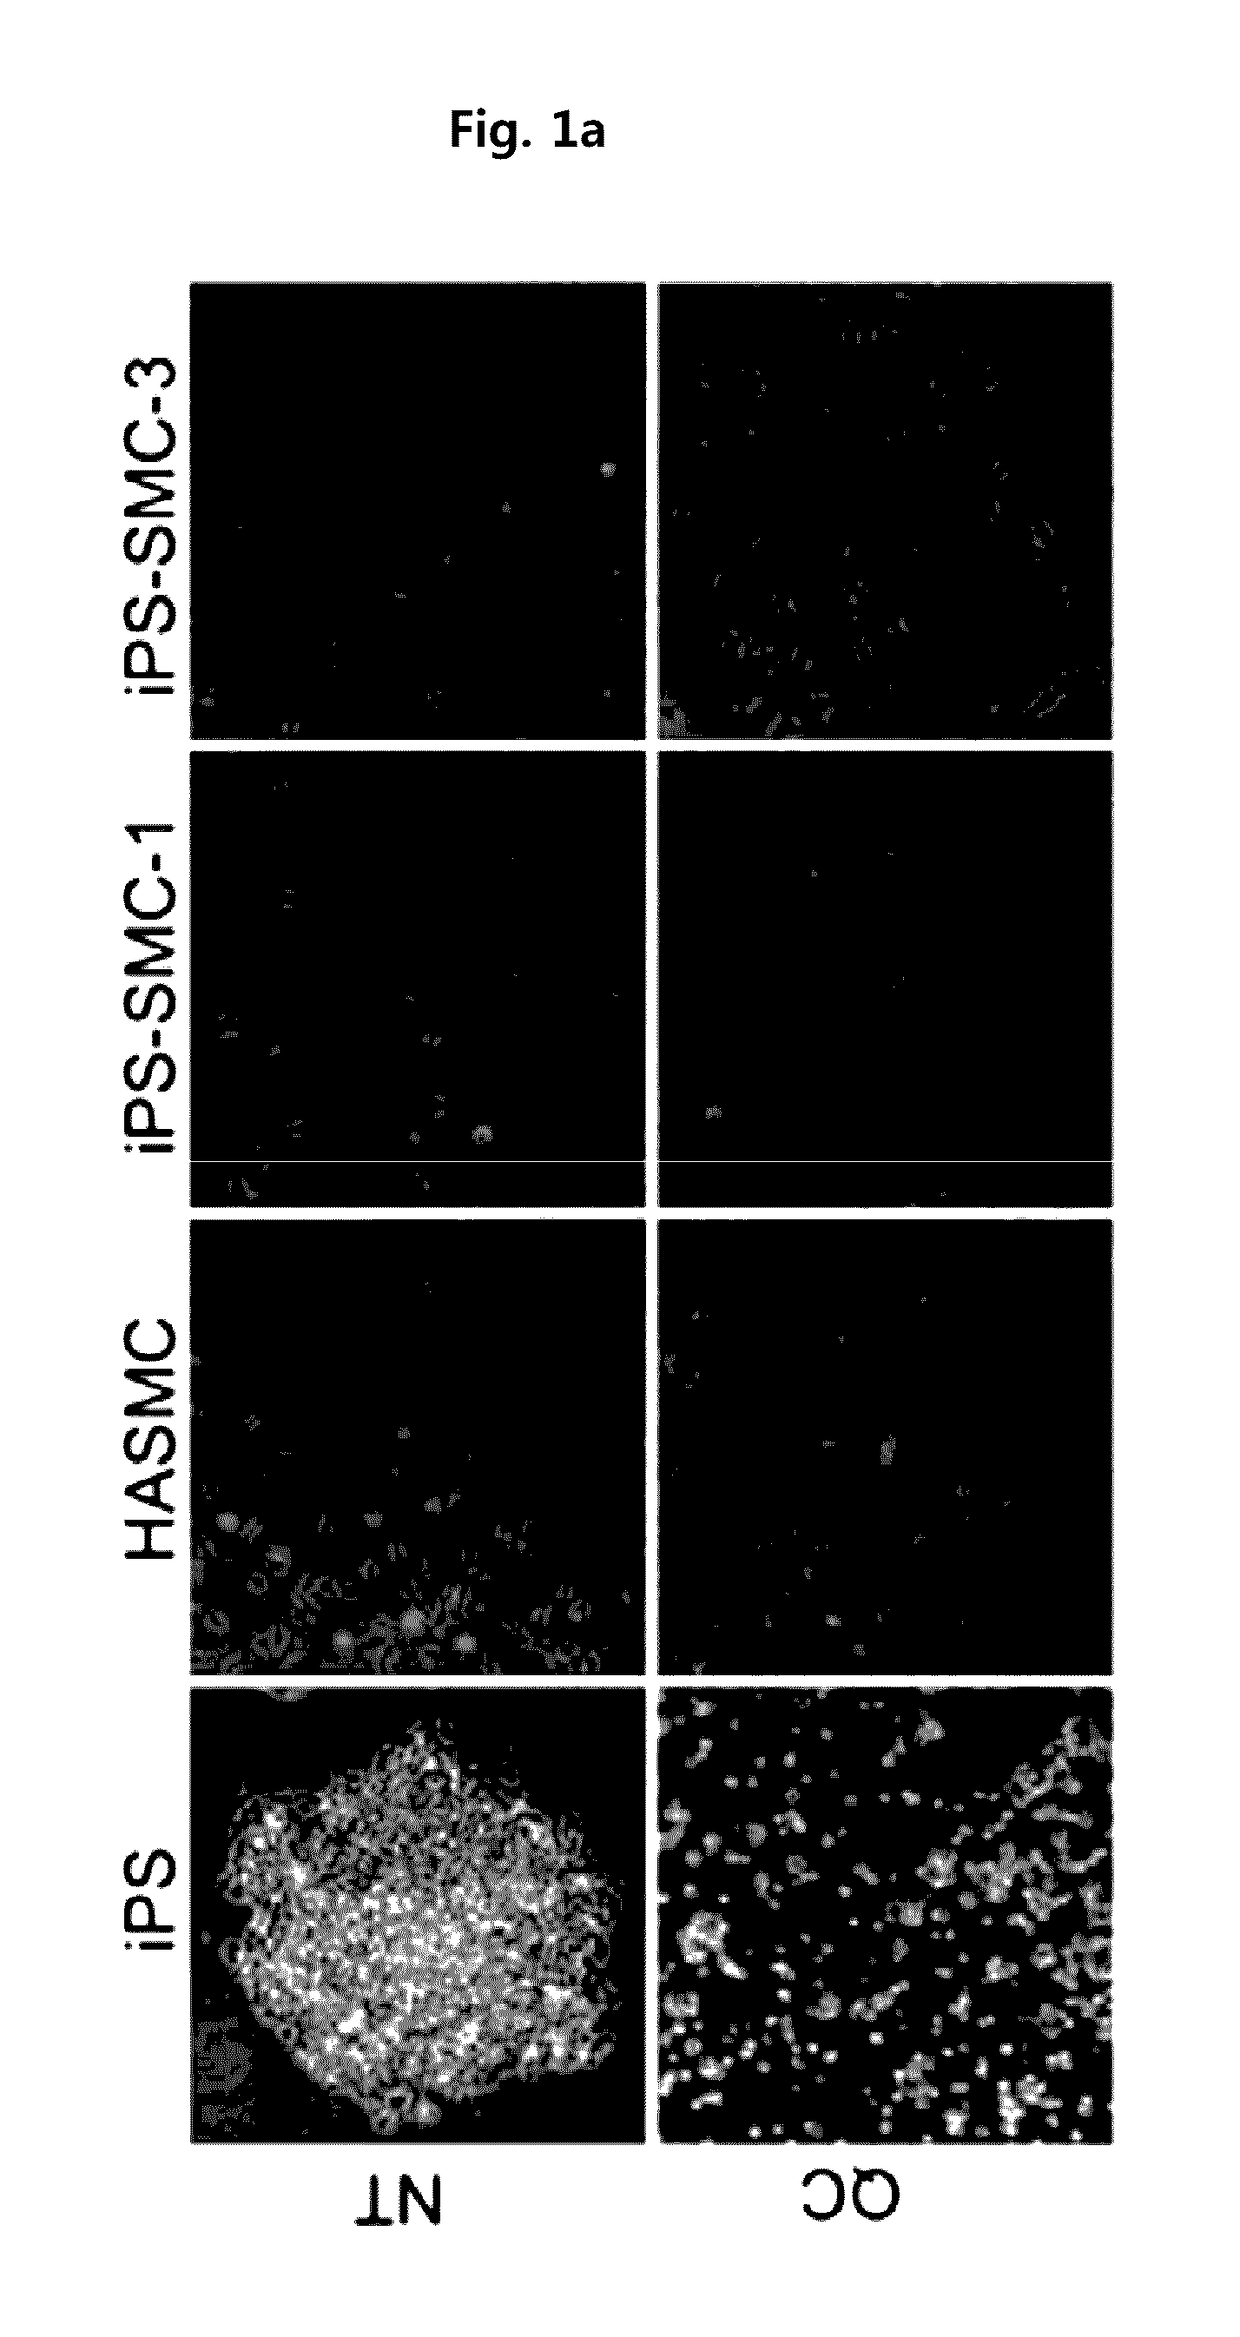 Method for suppressing teratoma formation via selective cell death induction in undifferentiated human-induced pluripotent stem cells